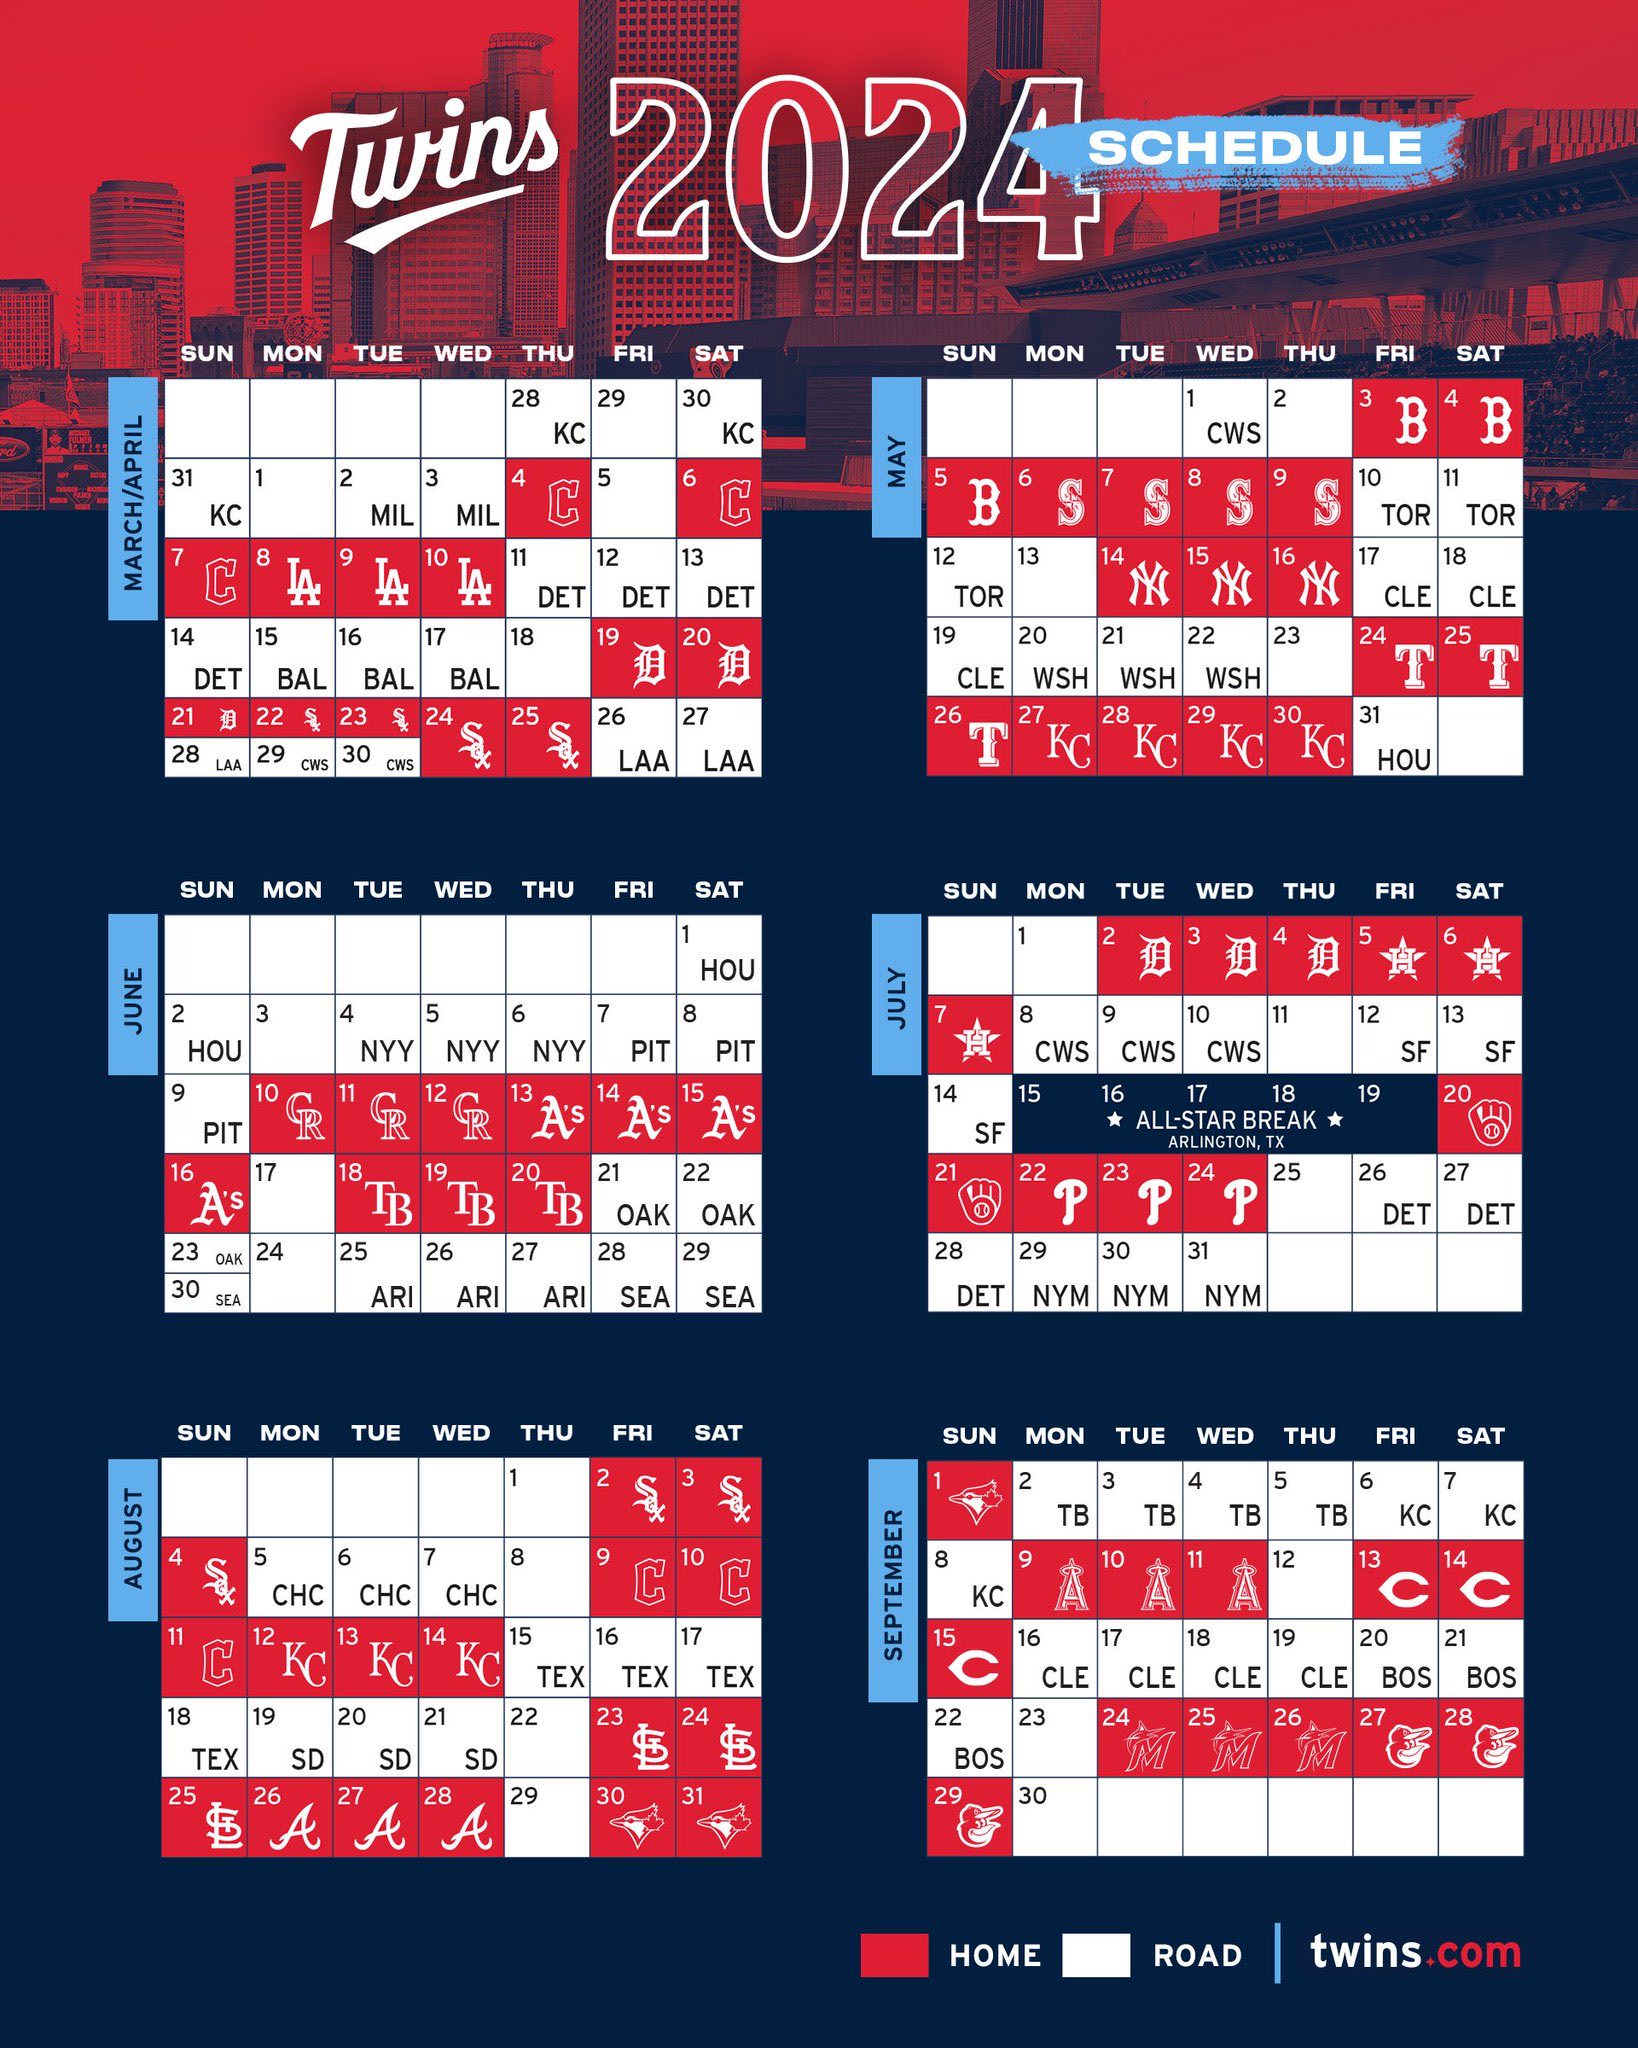 Ted on Twitter "Your 2024 MNTwins schedule https//t.co/YtkluBkVep